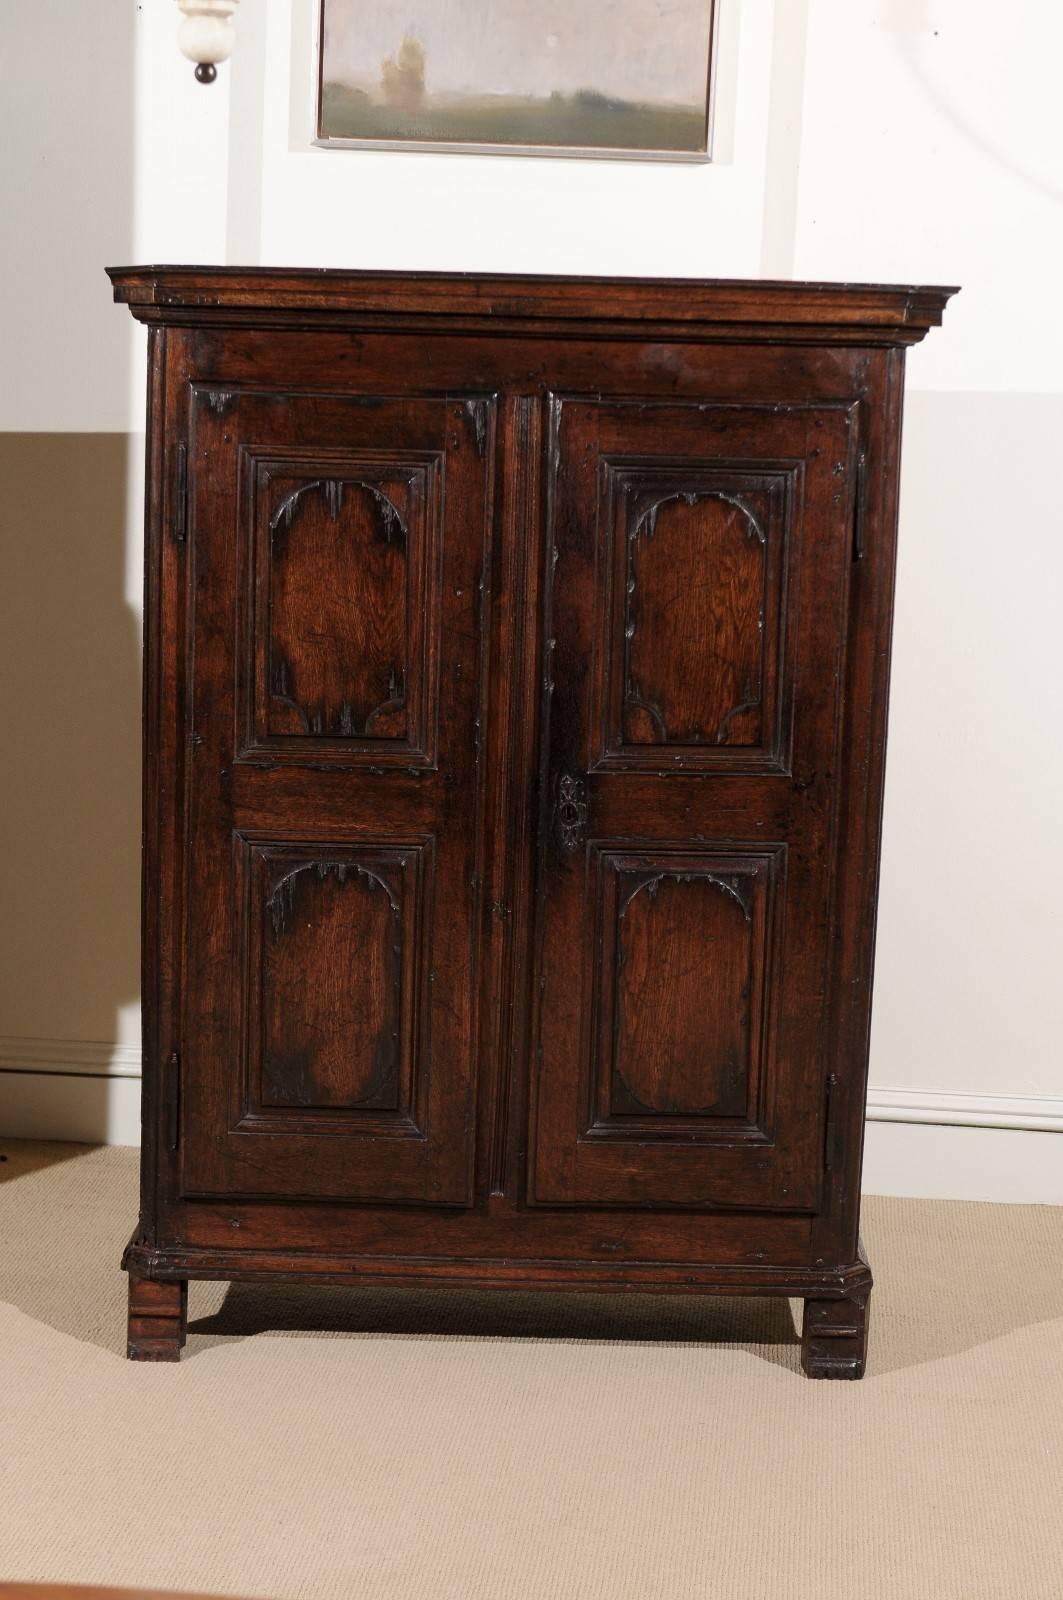 Armoire in oak, circa 1800 with carved doors and two interior shelves.